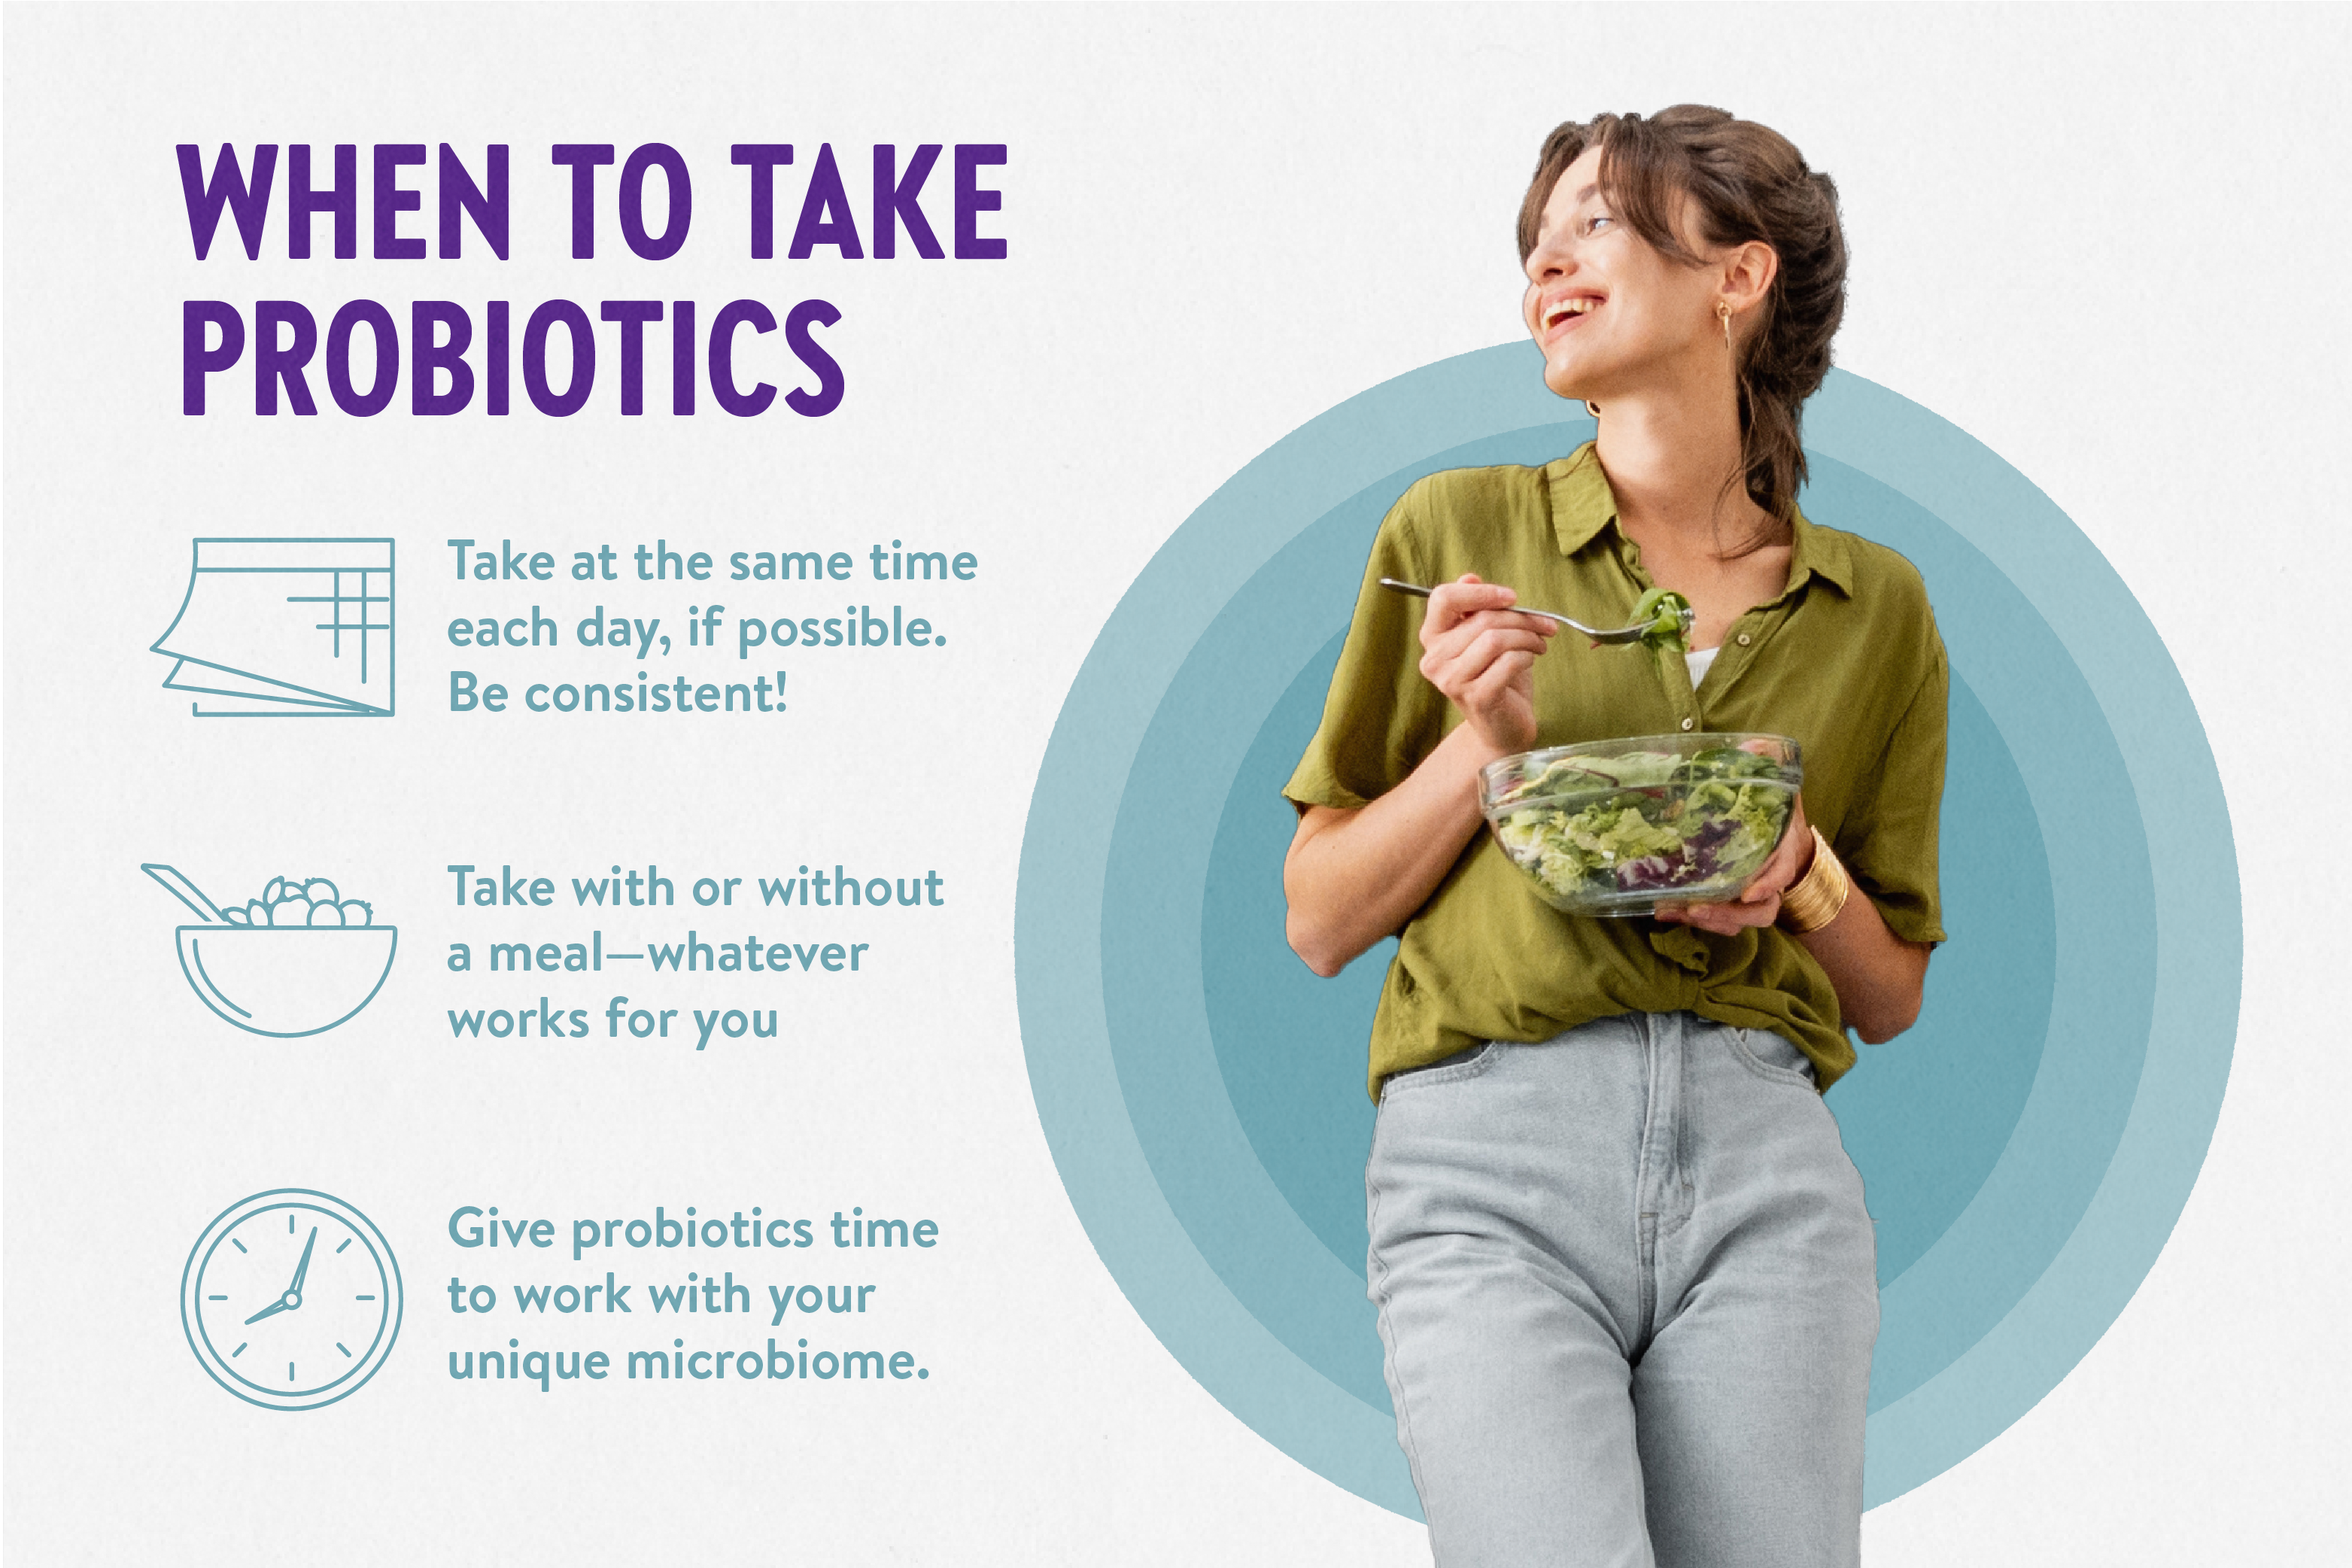 When to take probiotic